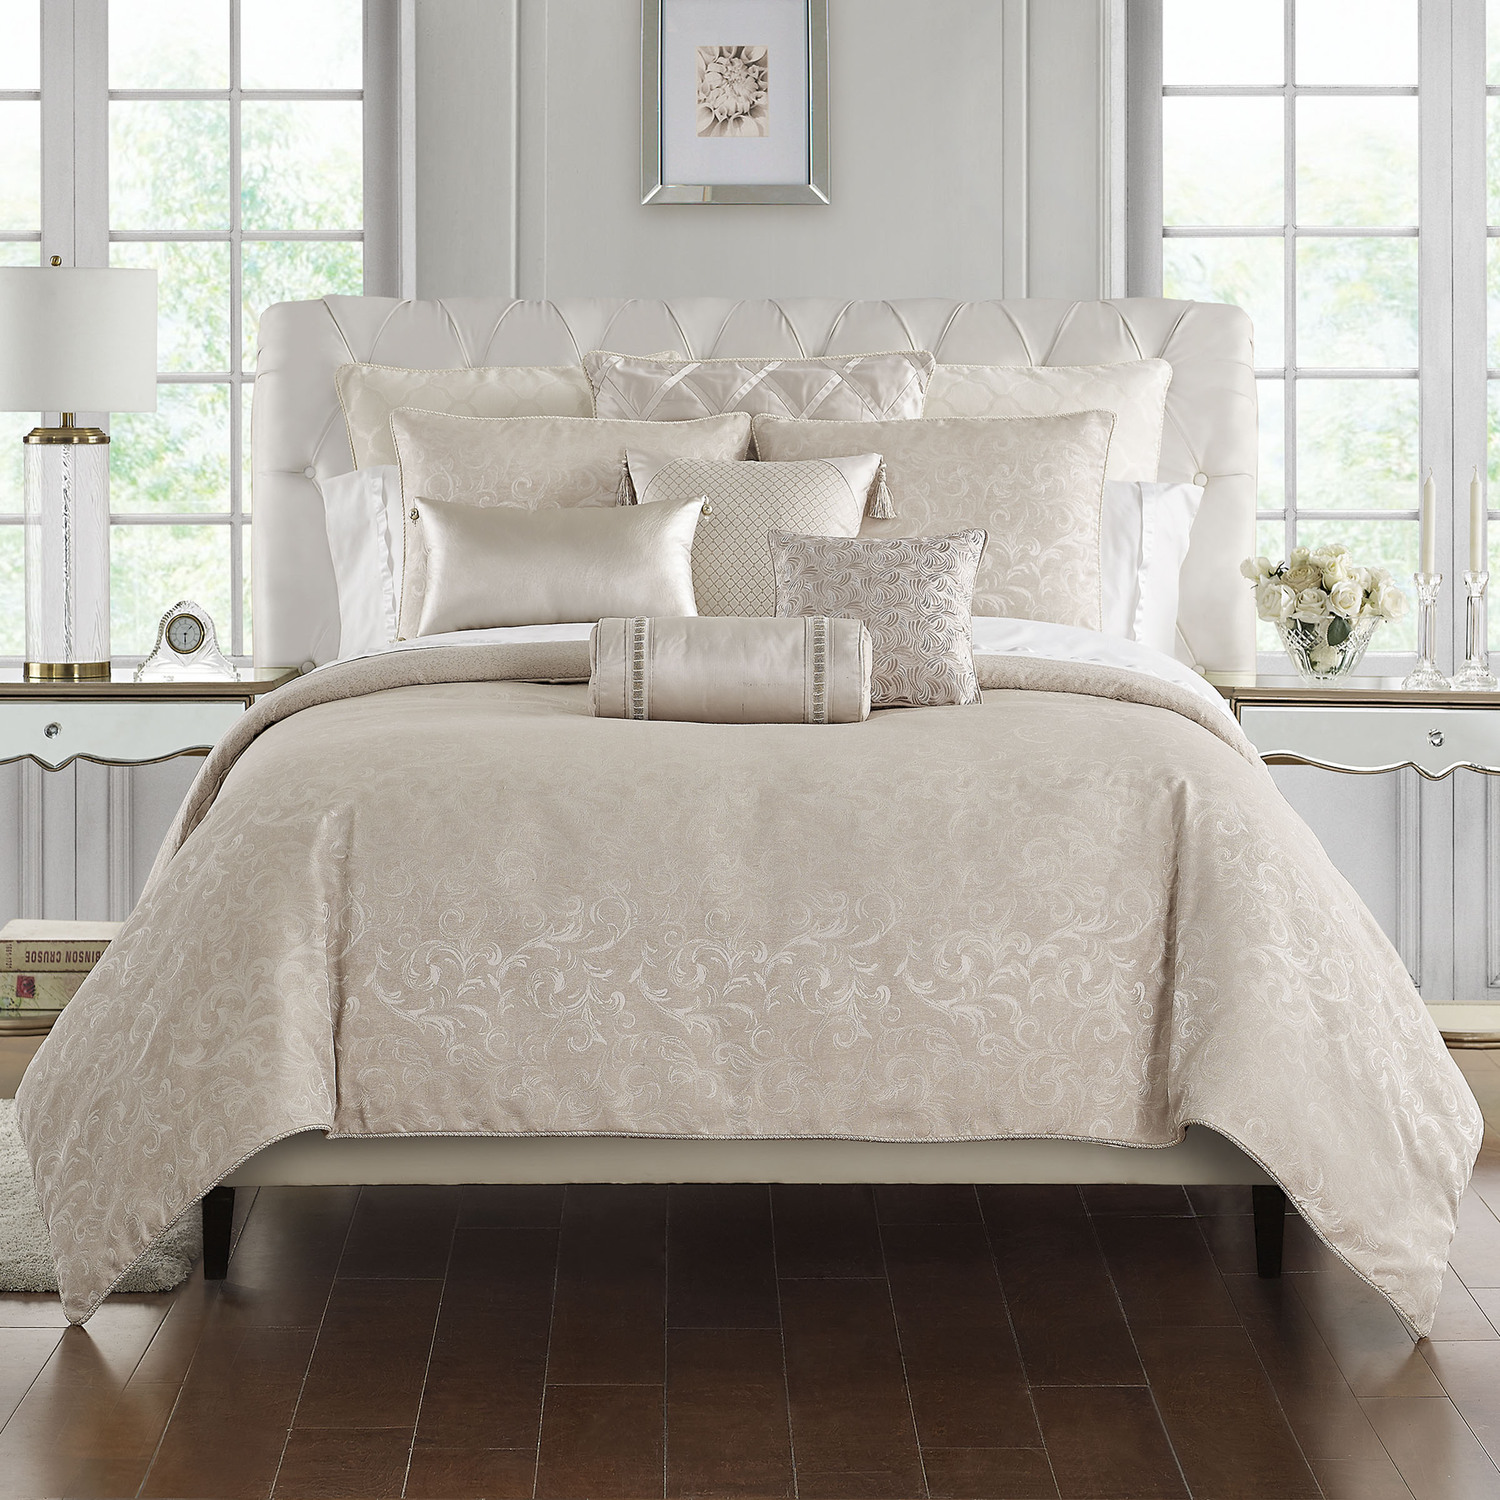 Gisella by Waterford Luxury Bedding - BeddingSuperStore.com